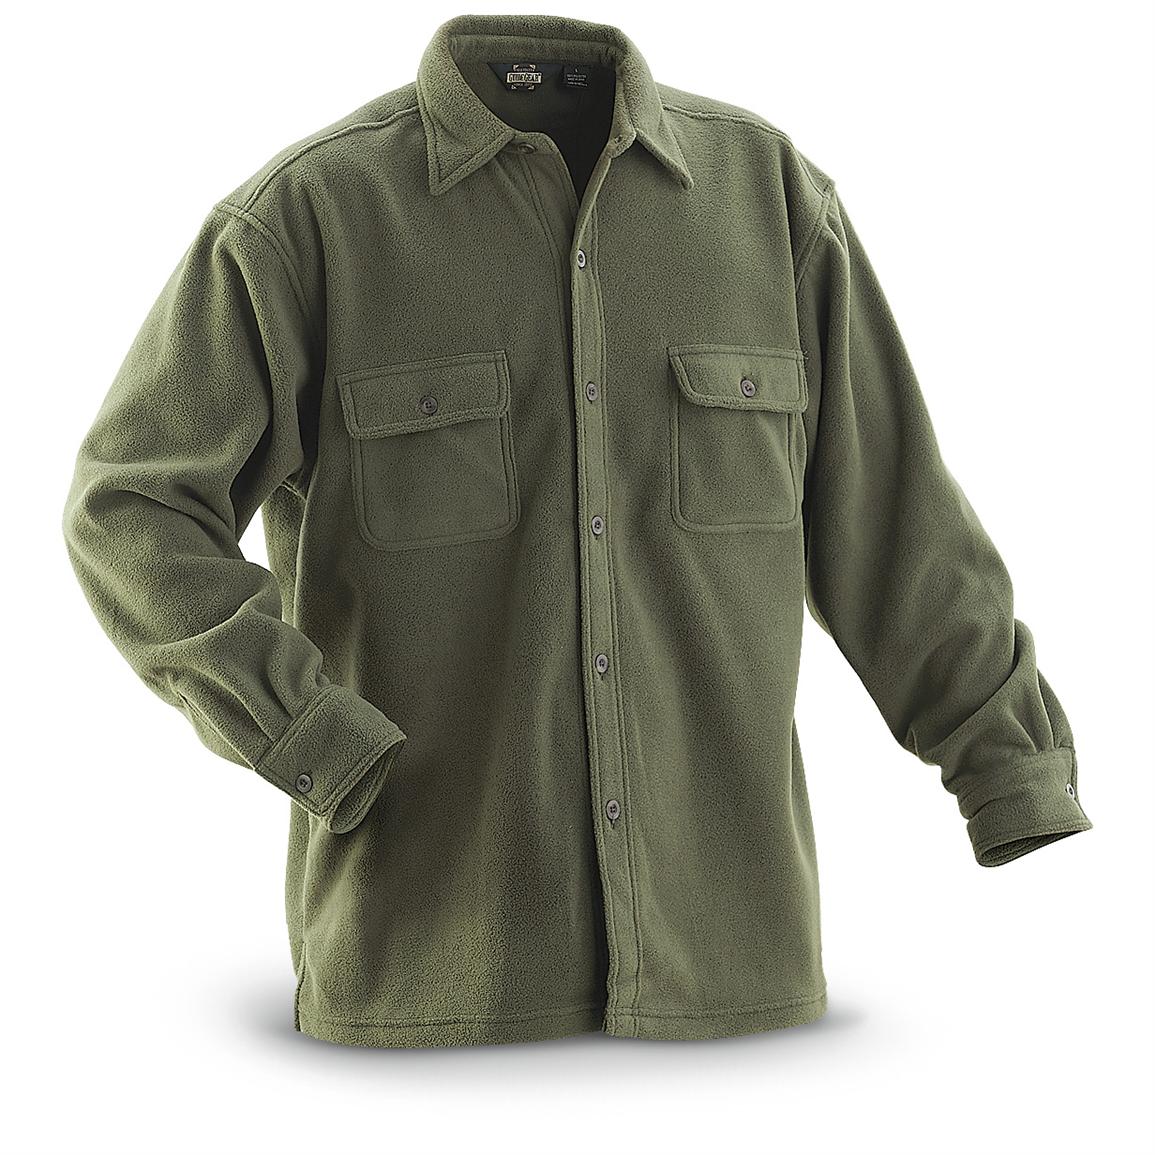 Guide Gear® Fleece CPO Jacket - 222439, Shirts at Sportsman's Guide